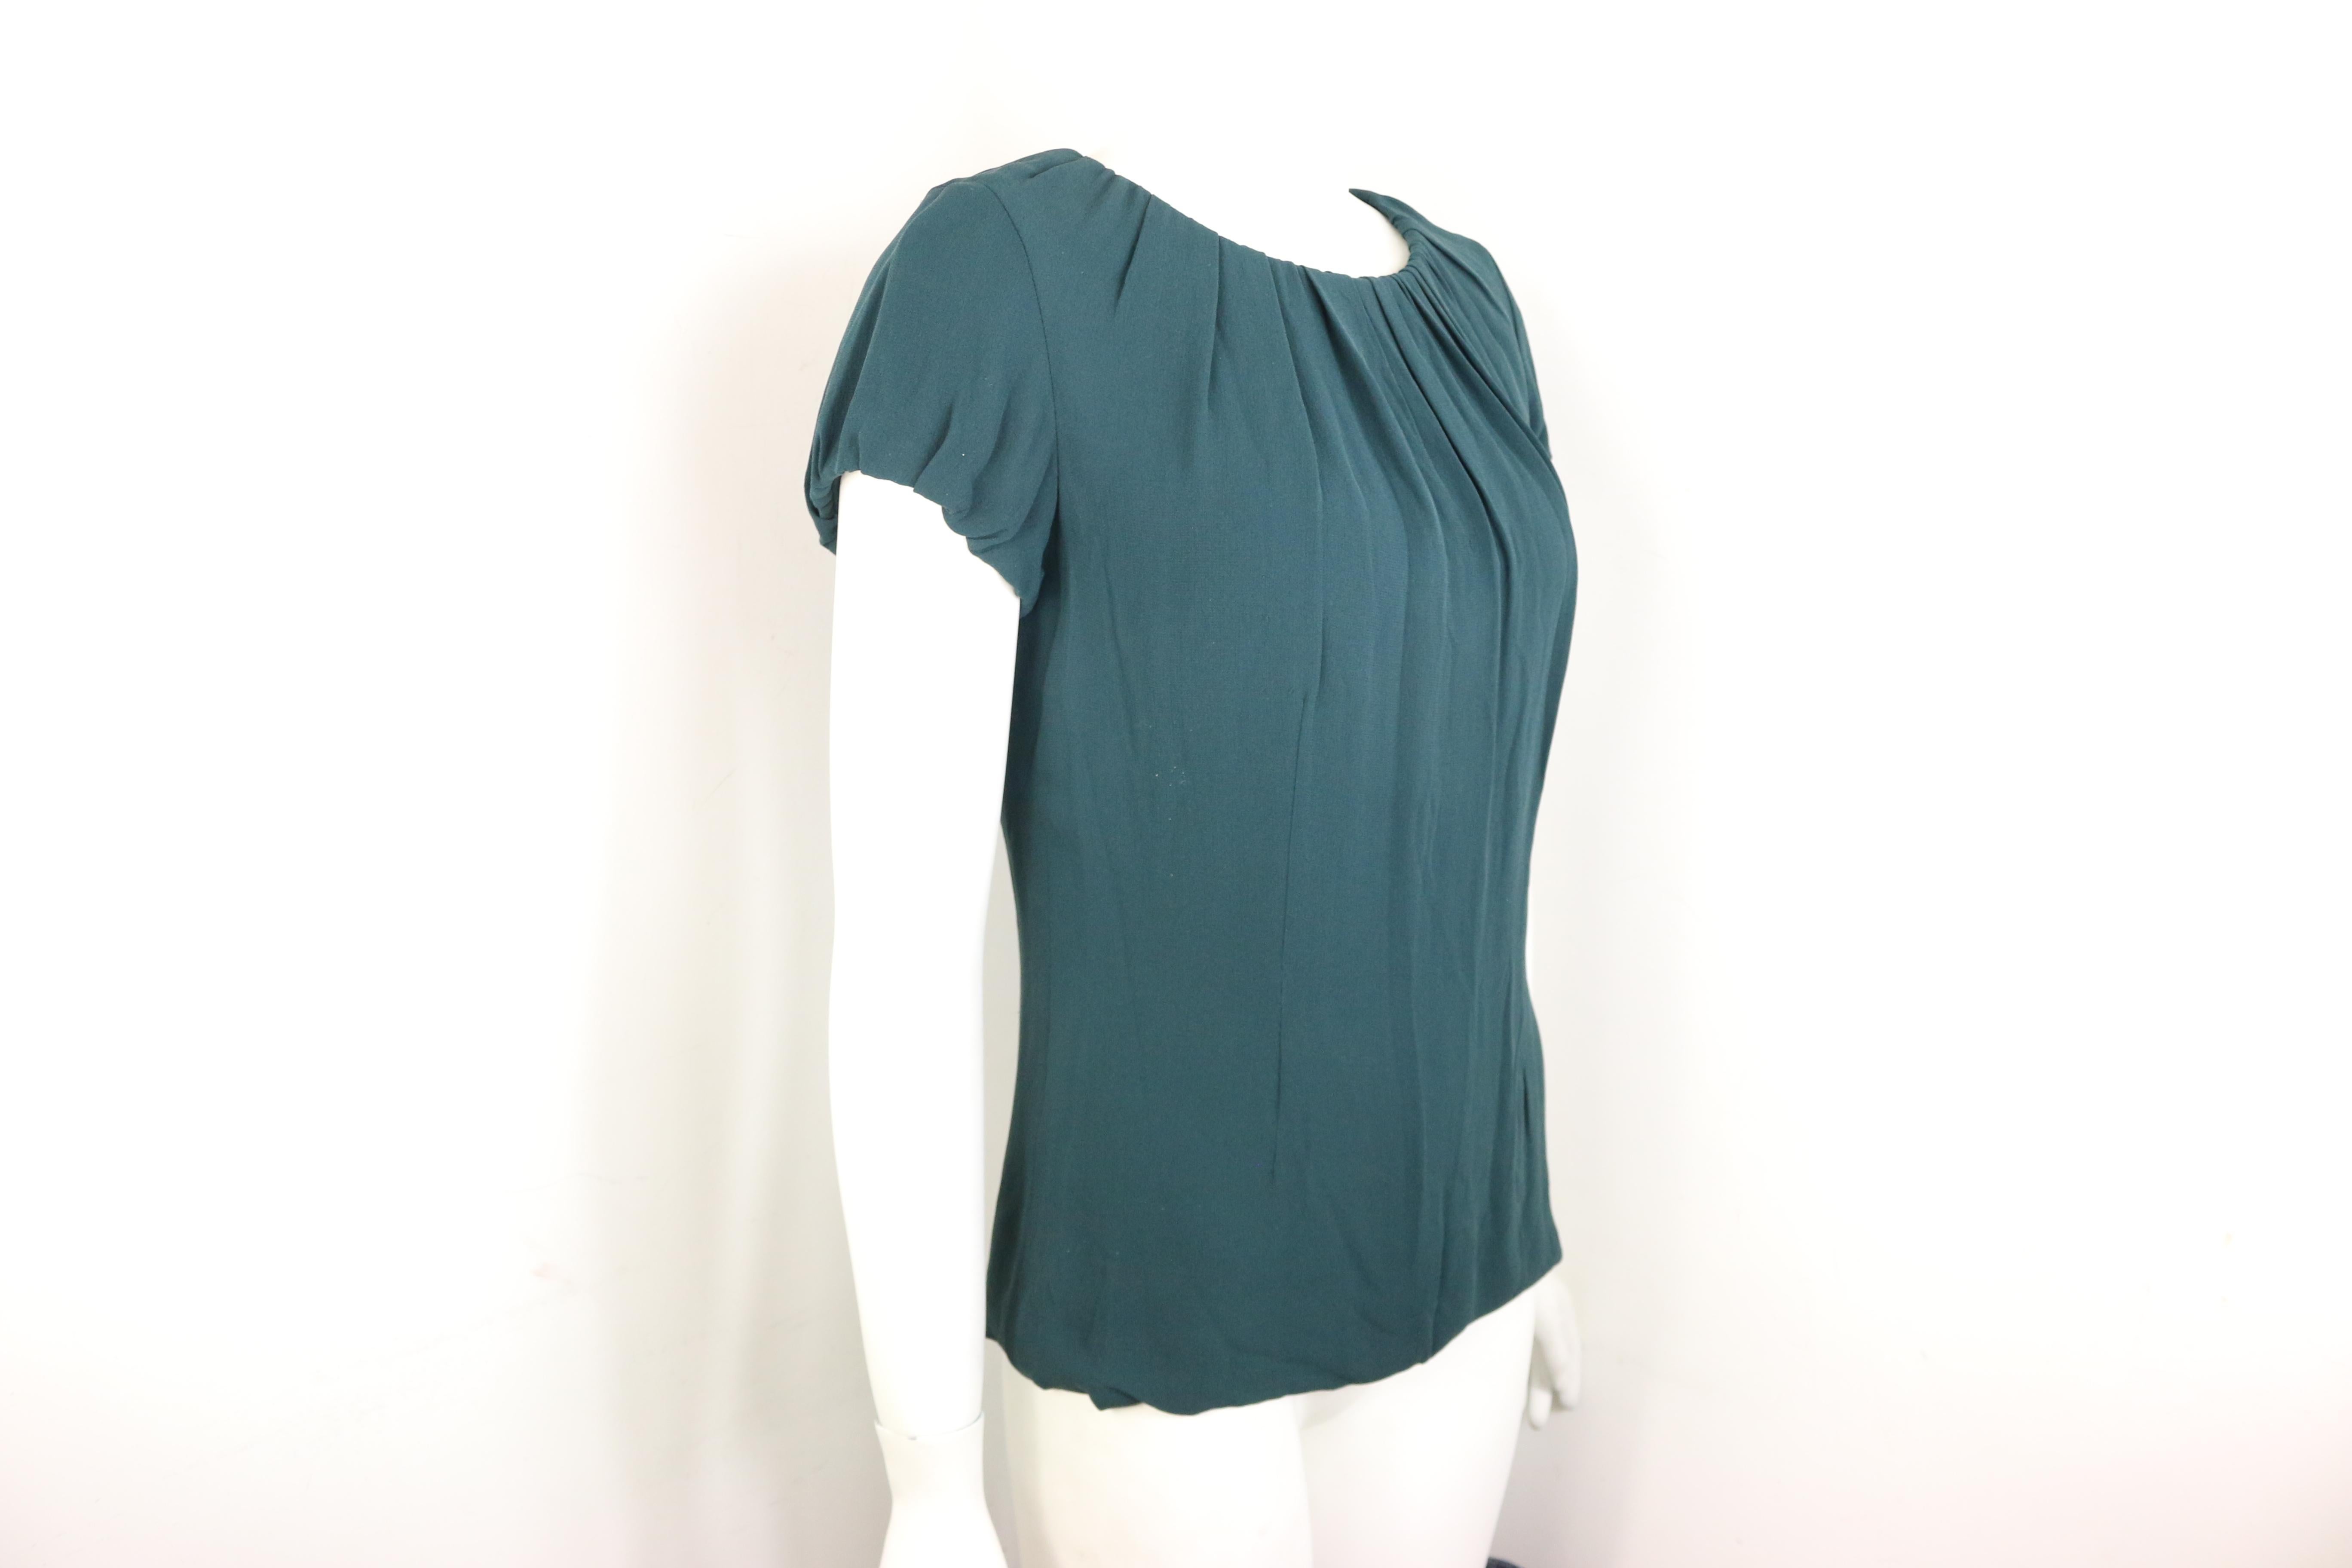 - Celine green silk short sleeves blouse. Inserted drawstring on the neckline and sleeves to create a flowy and pleated effect. 

- Featuring a side zip closure. Tiny hook fastening at the back with drawstrings attached. 

- Size 38. 

- 100% SIlk.